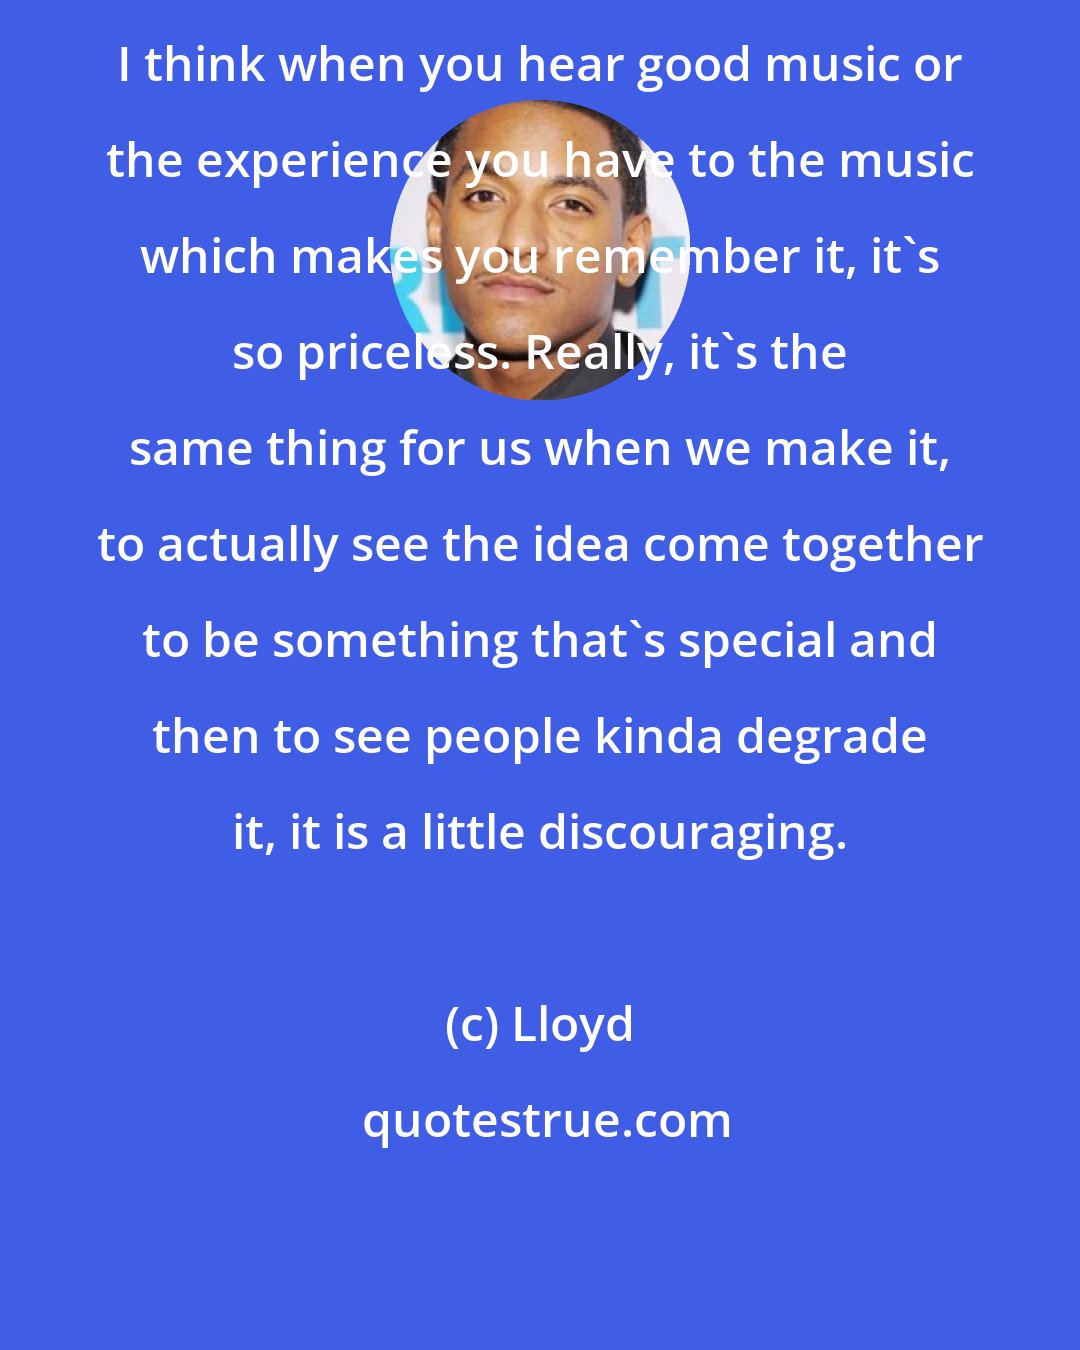 Lloyd: I think when you hear good music or the experience you have to the music which makes you remember it, it's so priceless. Really, it's the same thing for us when we make it, to actually see the idea come together to be something that's special and then to see people kinda degrade it, it is a little discouraging.